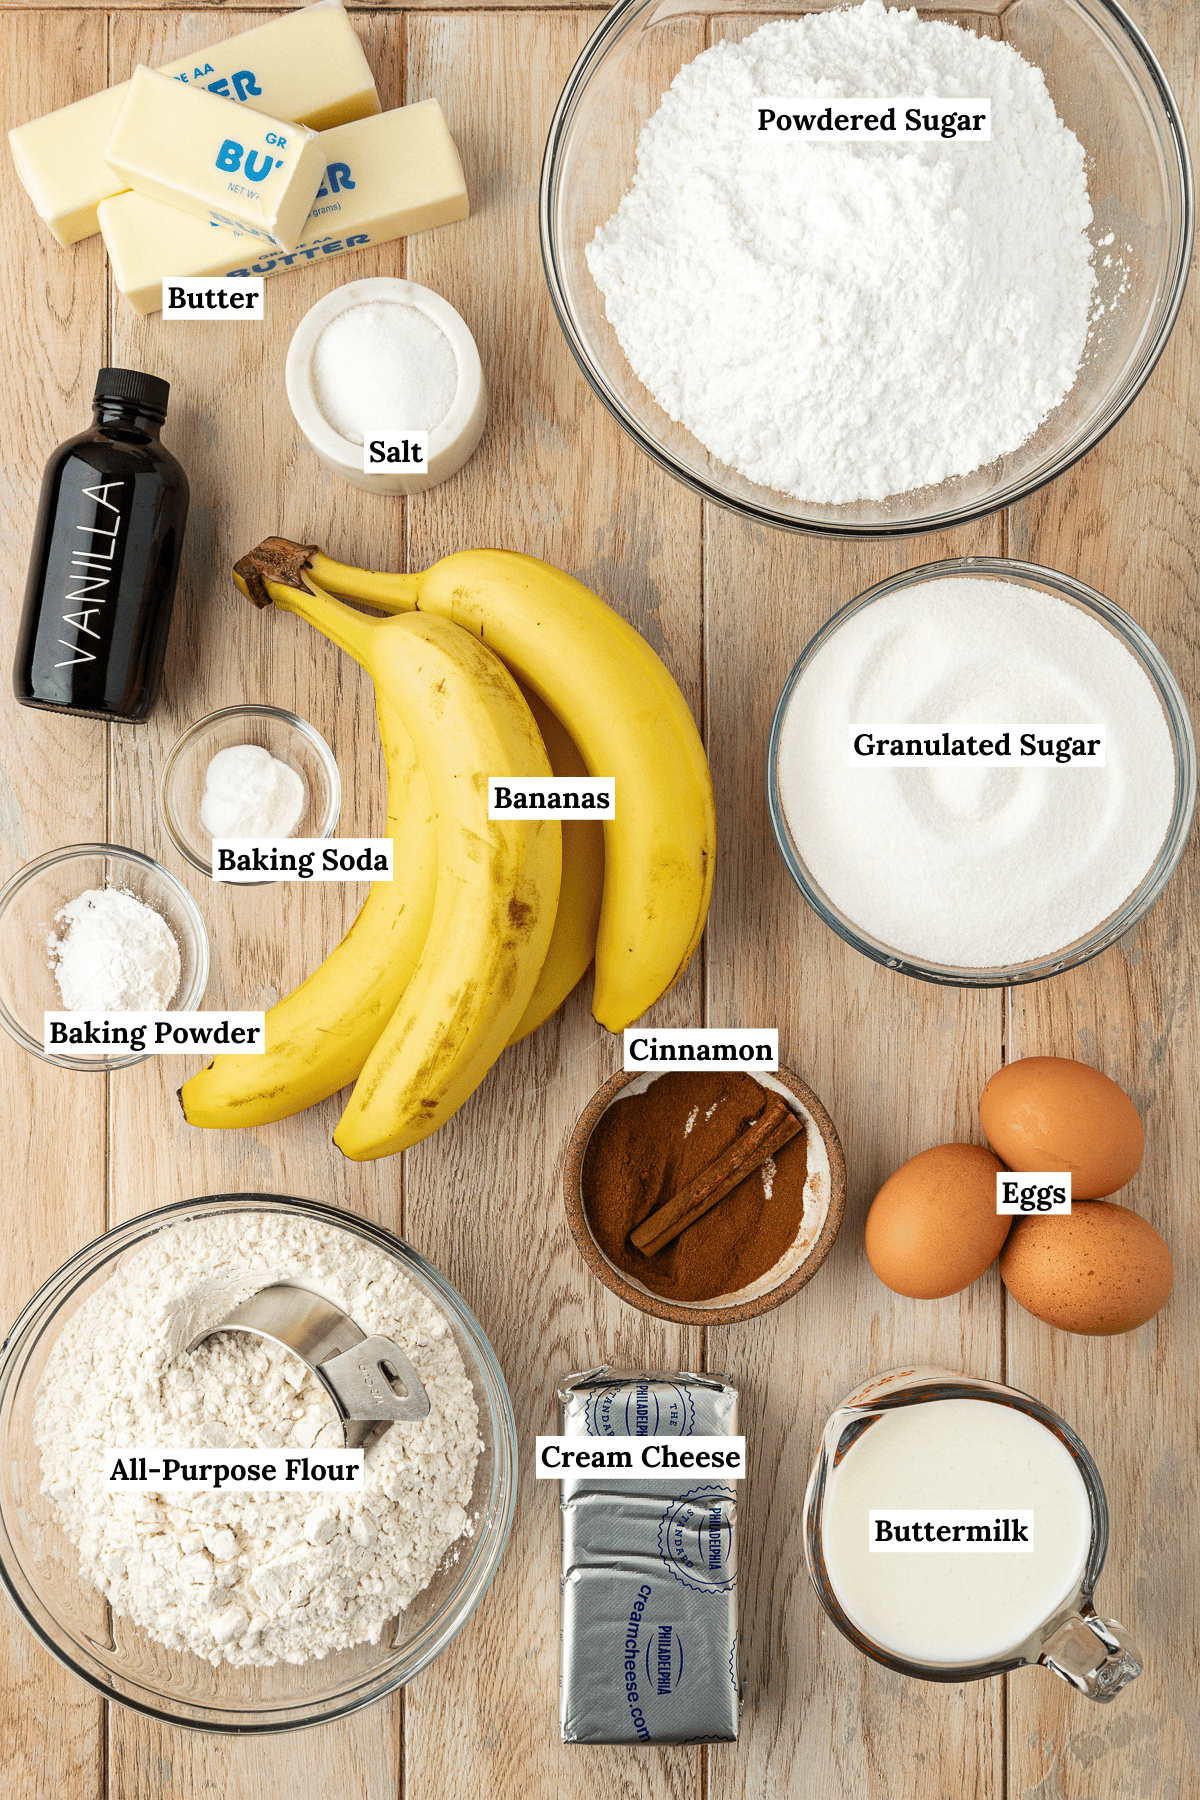 over head view of the ingredients for banana cake on a wood surface including a bowl of powdered sugar, a bowl of granulated sugar, two and a half sticks of butter, a small white dish of salt, a bottle of vanilla extract, a small bowl of baking soda, a small bowl of baking powder, a bowl of cinnamon, three large eggs, four whole bananas, a bowl of all-purpose flour, a block of cream cheese and a measuring cup of buttermilk